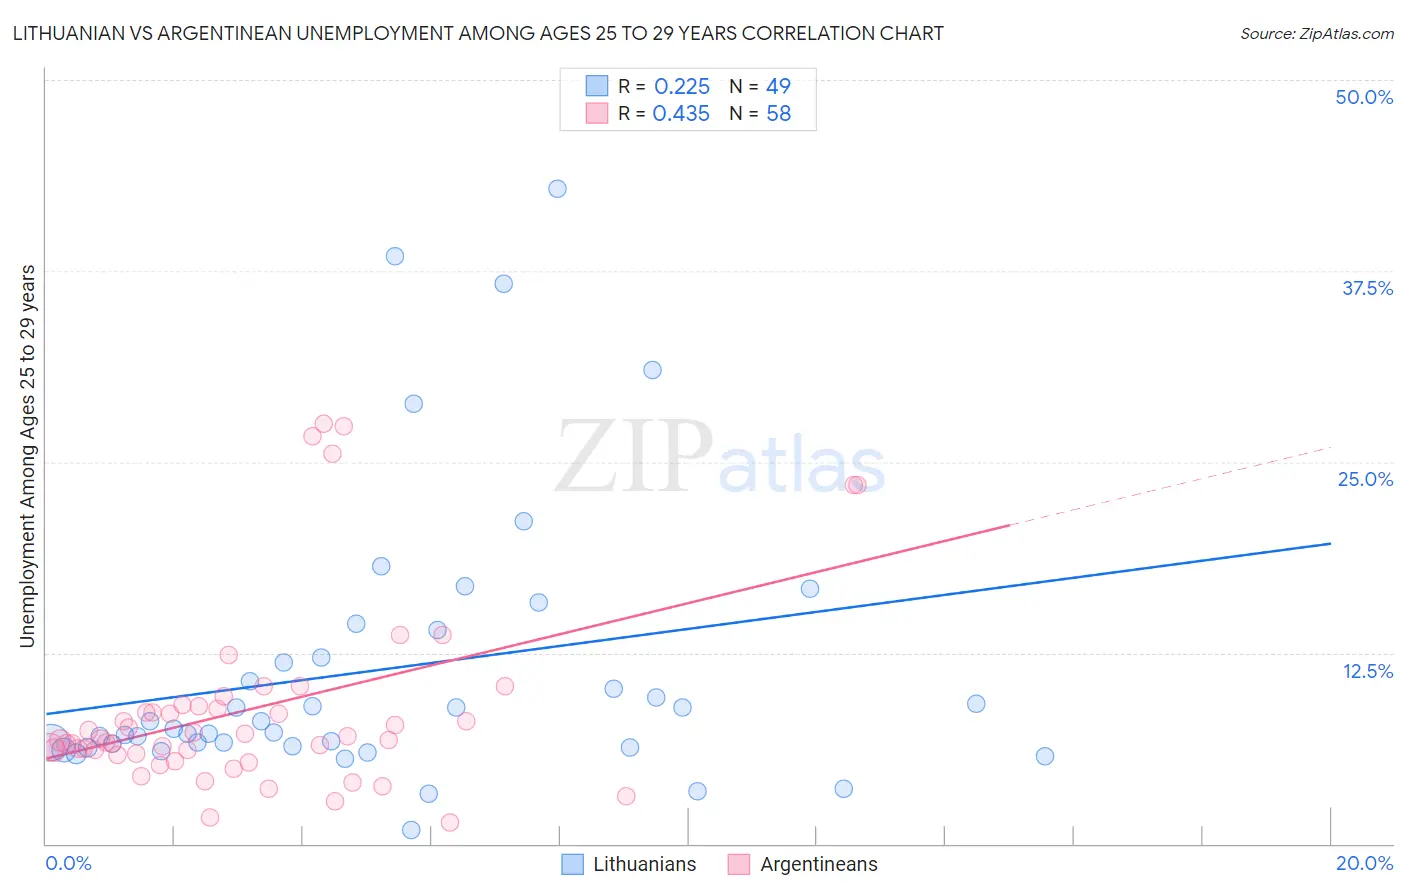 Lithuanian vs Argentinean Unemployment Among Ages 25 to 29 years